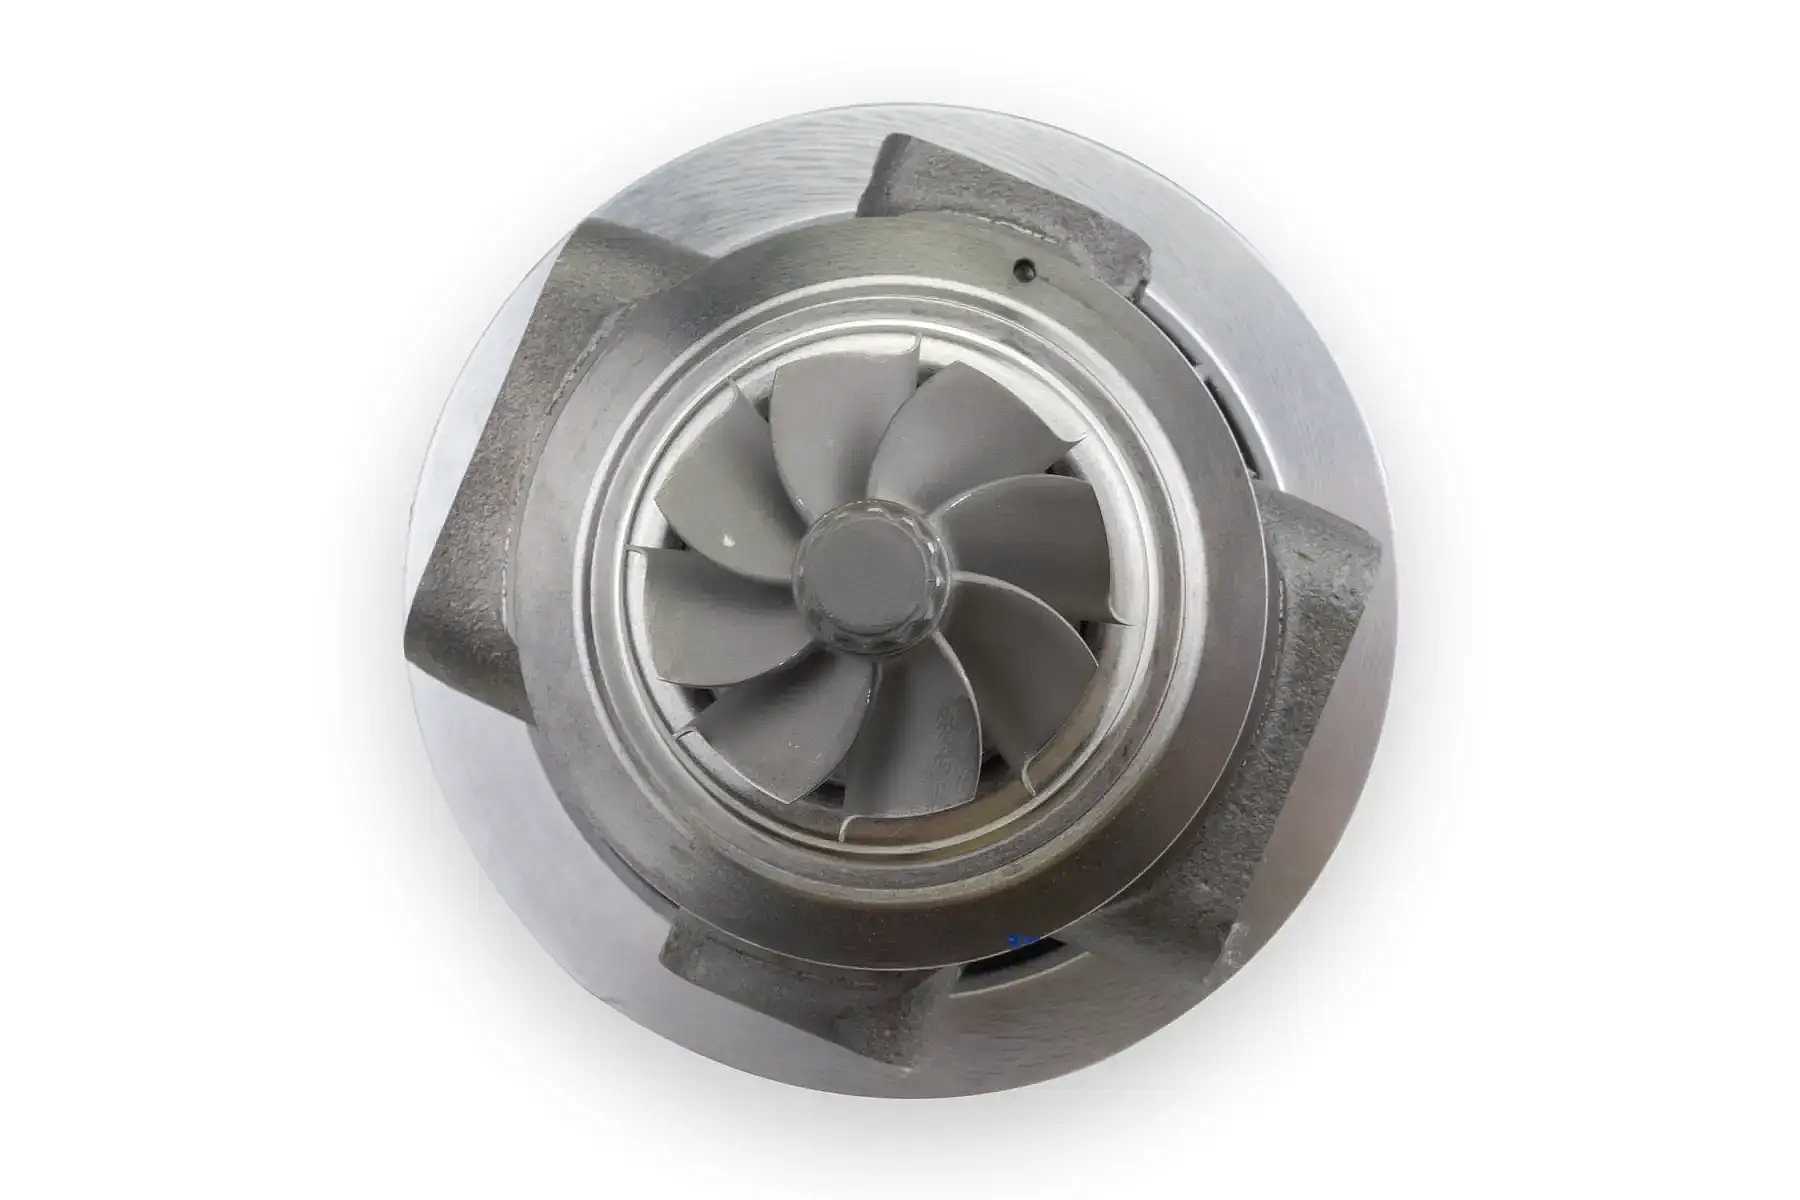 core assembly 2.0L TSI EA888 Gen.3 for turbocharger IS38